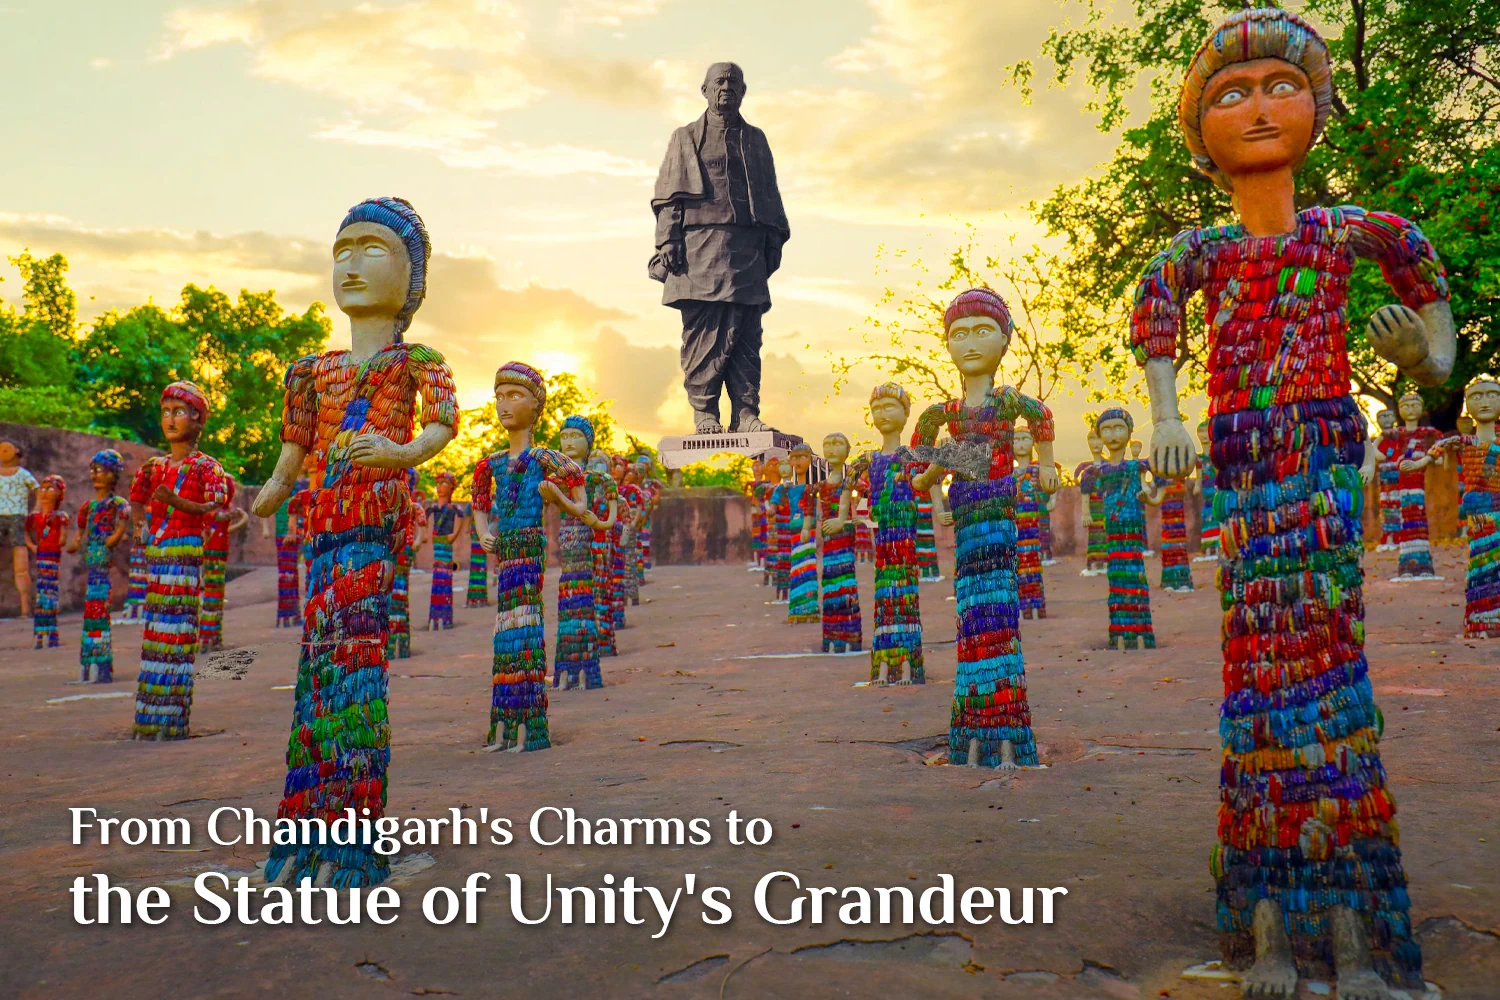 The Grandeur of the Statue of Unity